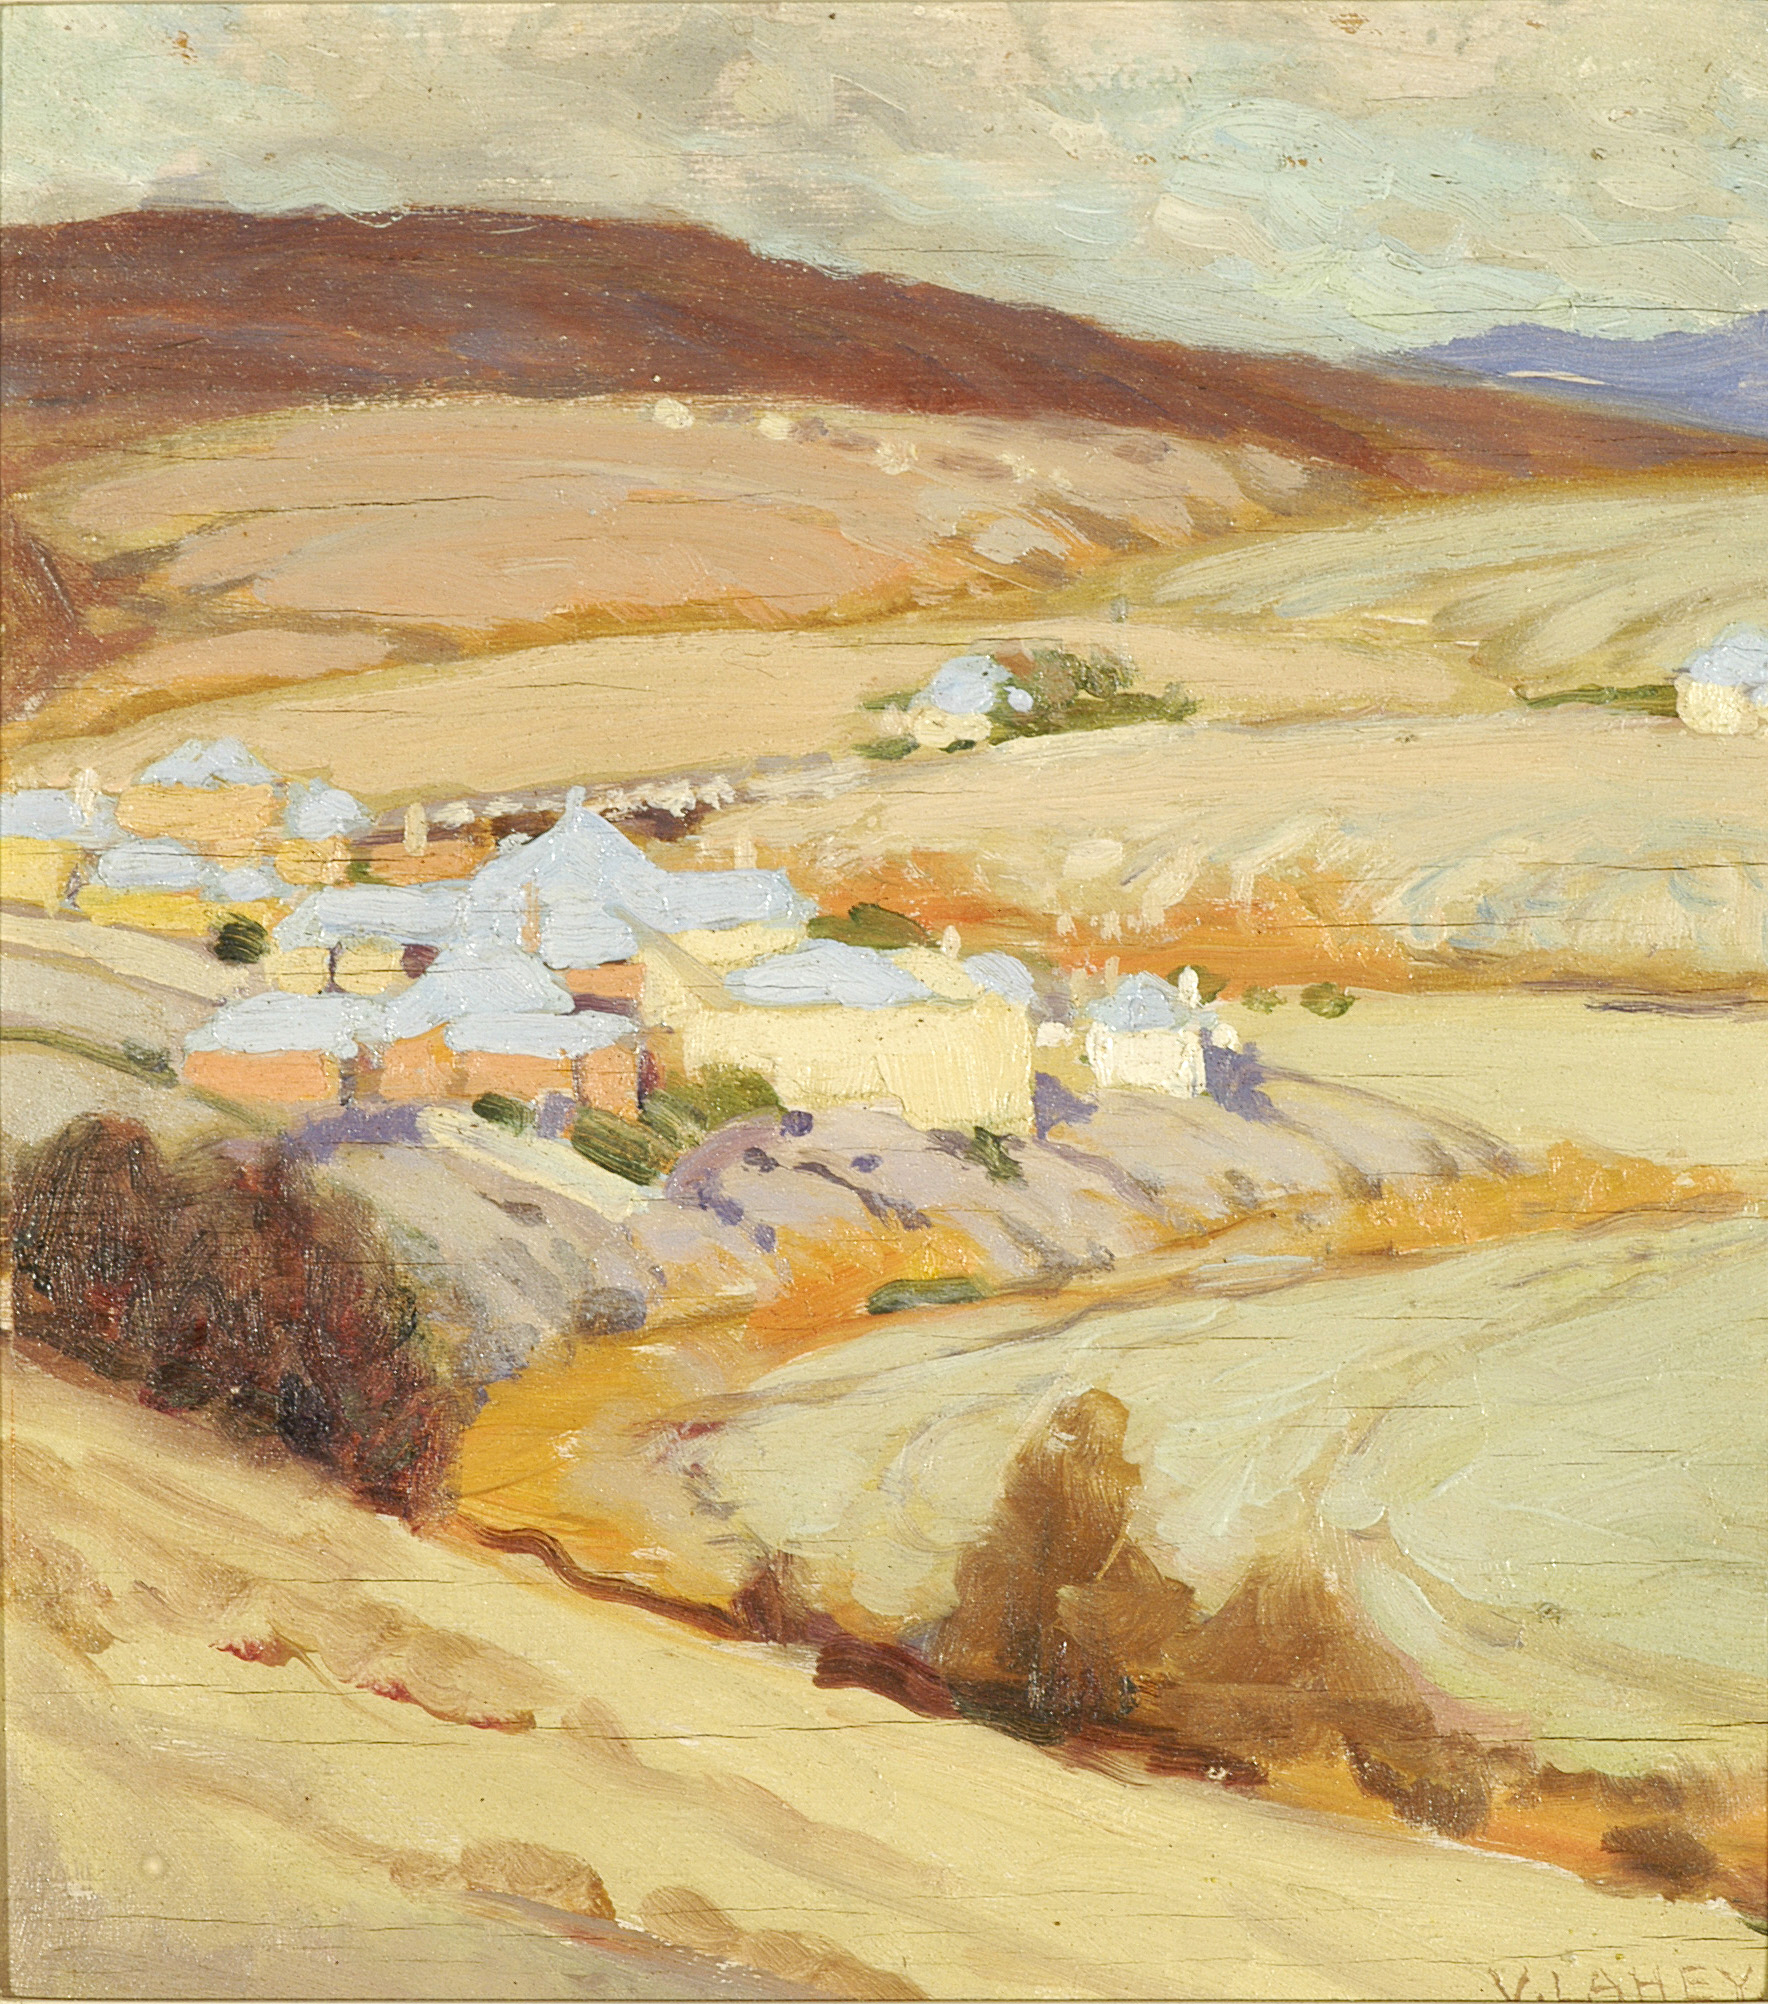 An oil painting of buildings nestled in a dry, hilly landscape